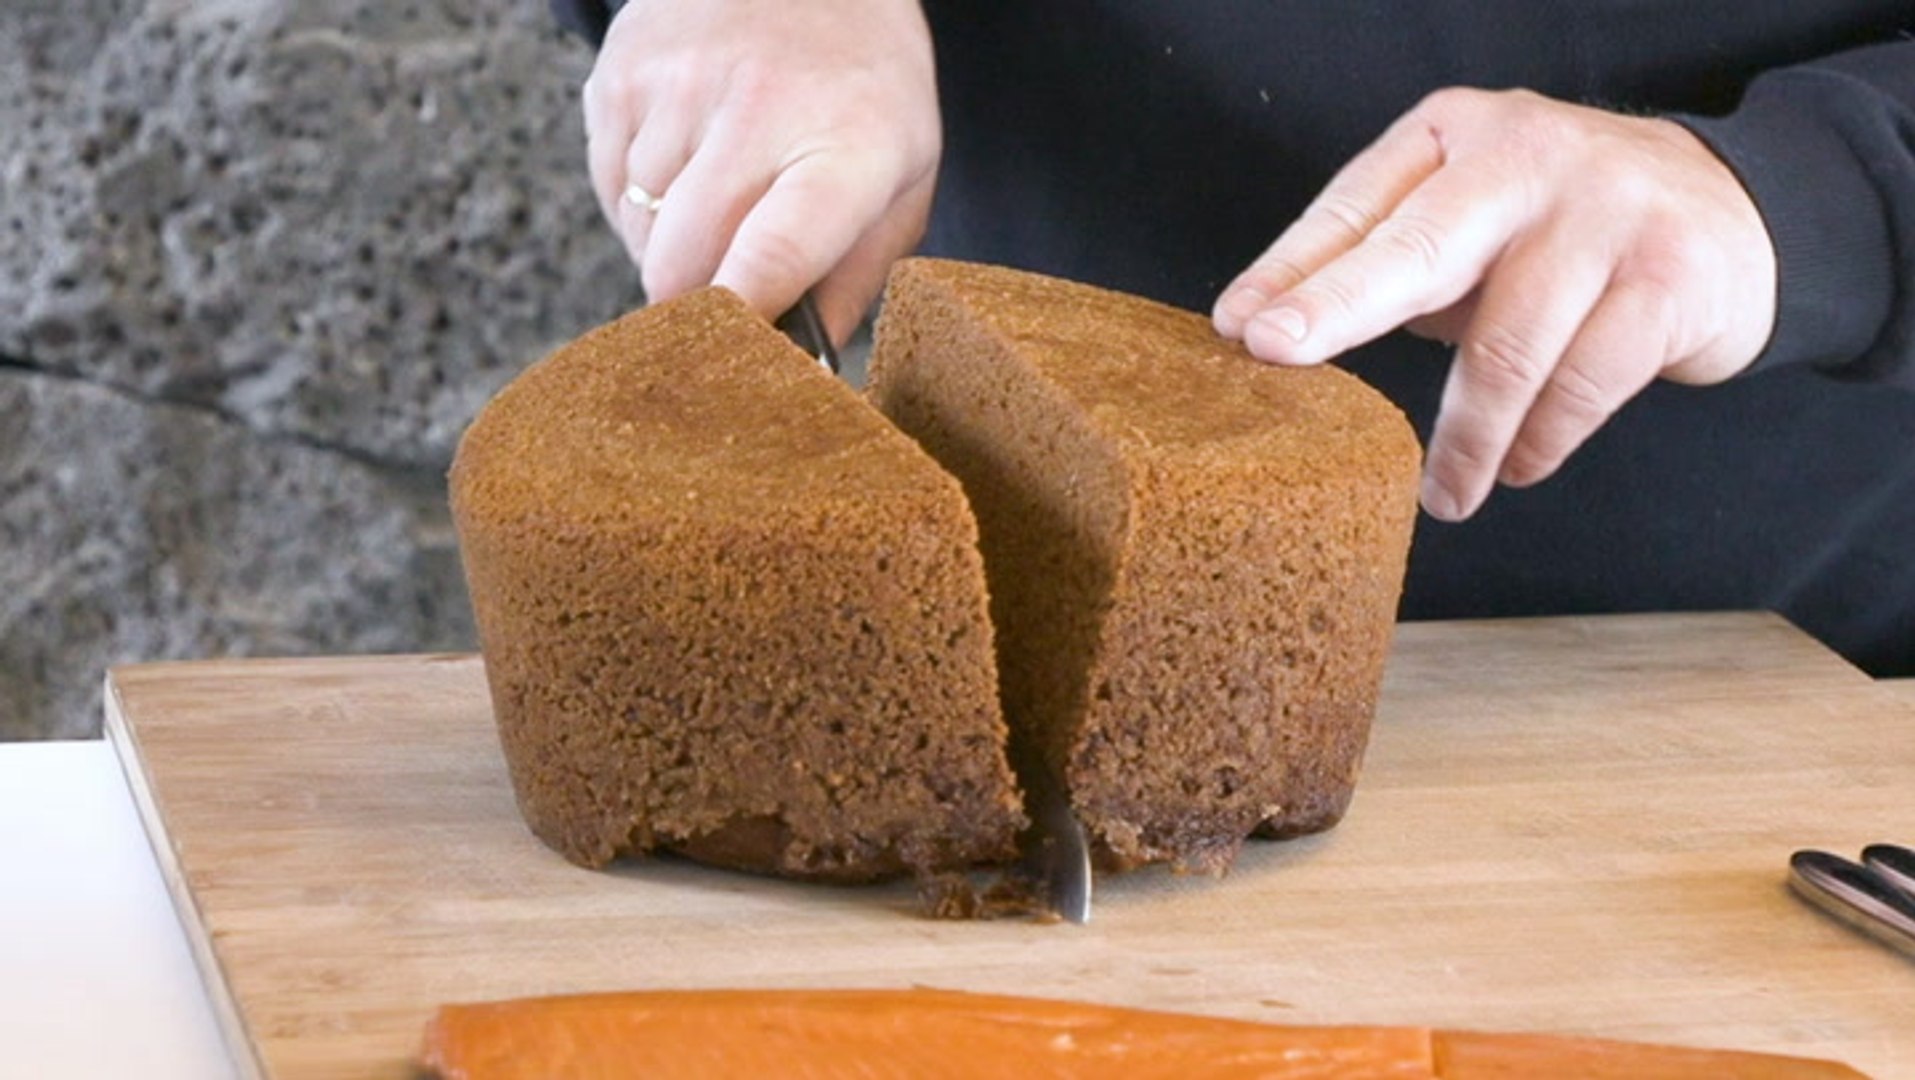 How volcanic lava bread is made in Iceland